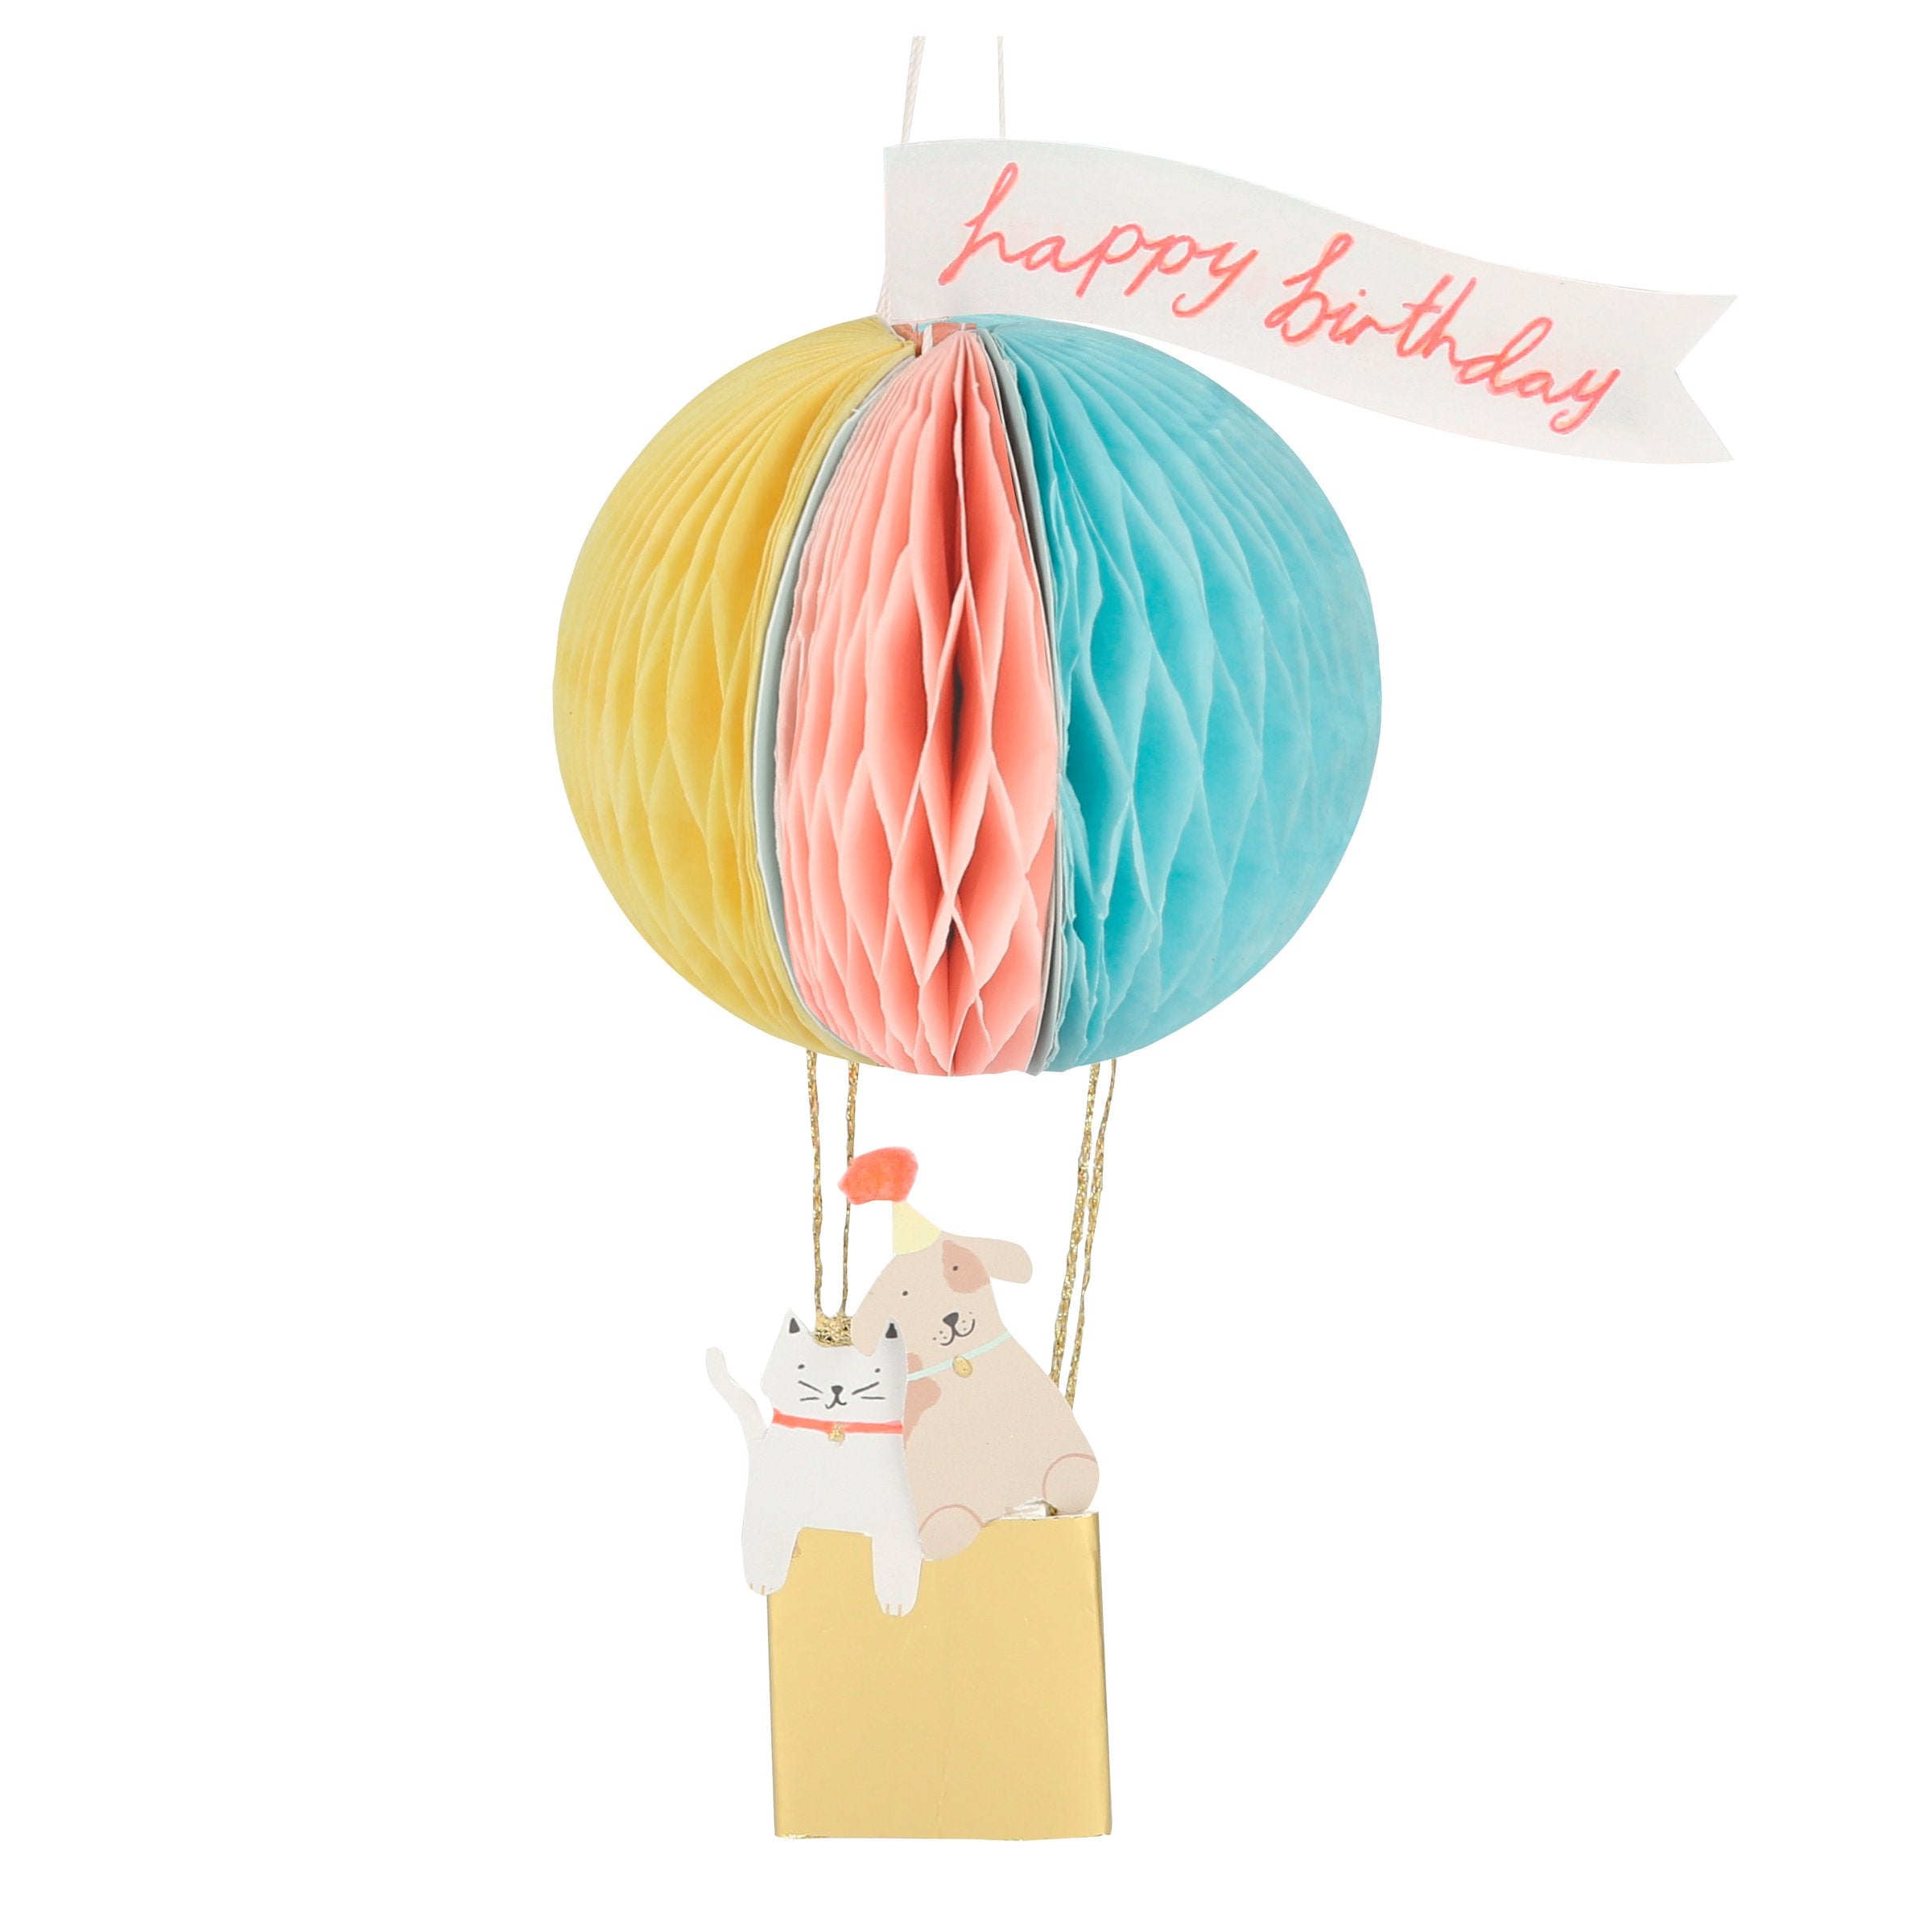 Our 3D happy birthday card is also a wonderful hot air balloon decoration with honeycomb paper details.